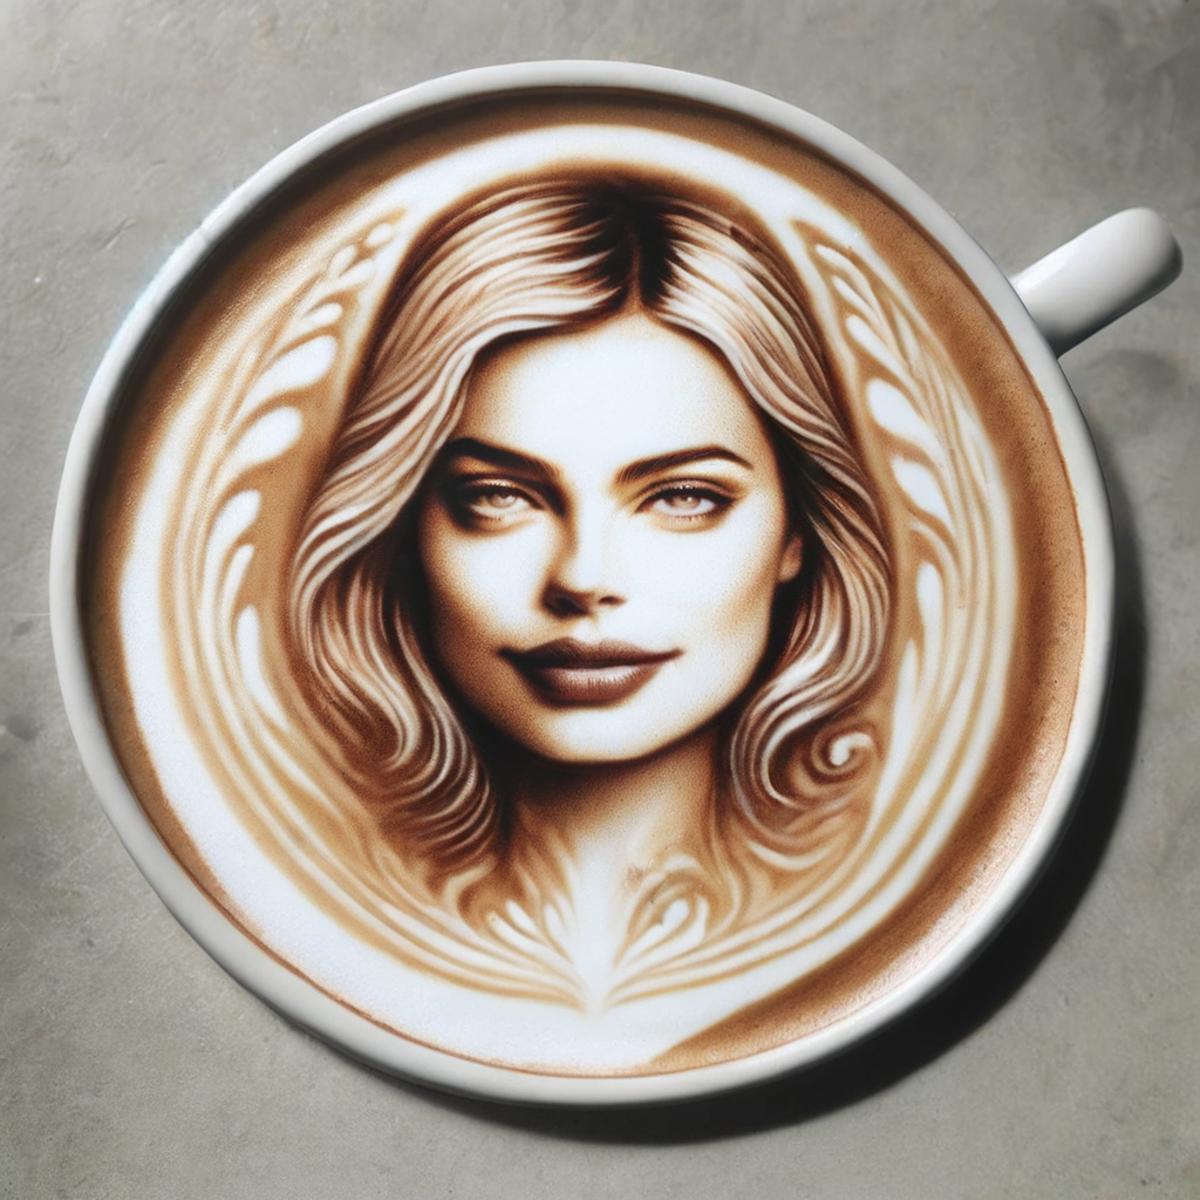 Cappuccino Style image by andreac75